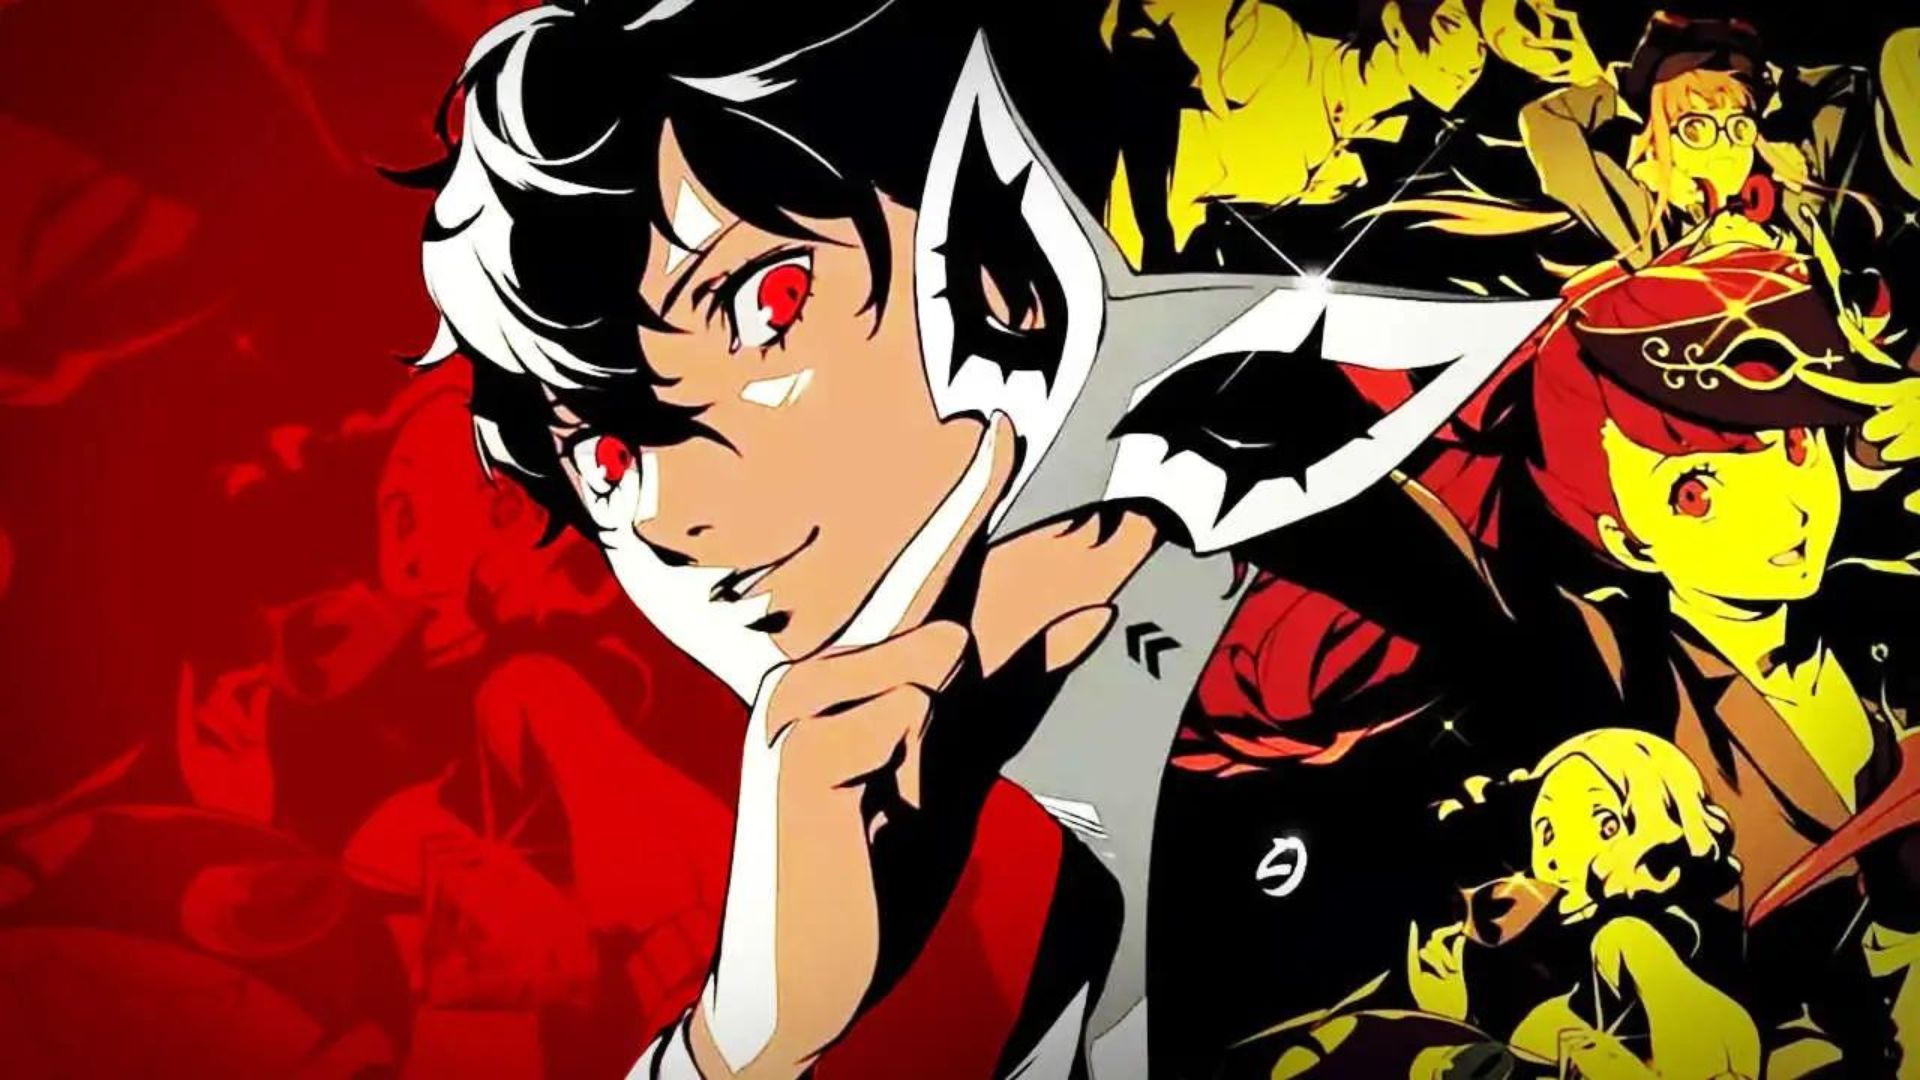 Persona 5 Royal's PS45 Save File Can Be Converted To Steam According To Reddit User